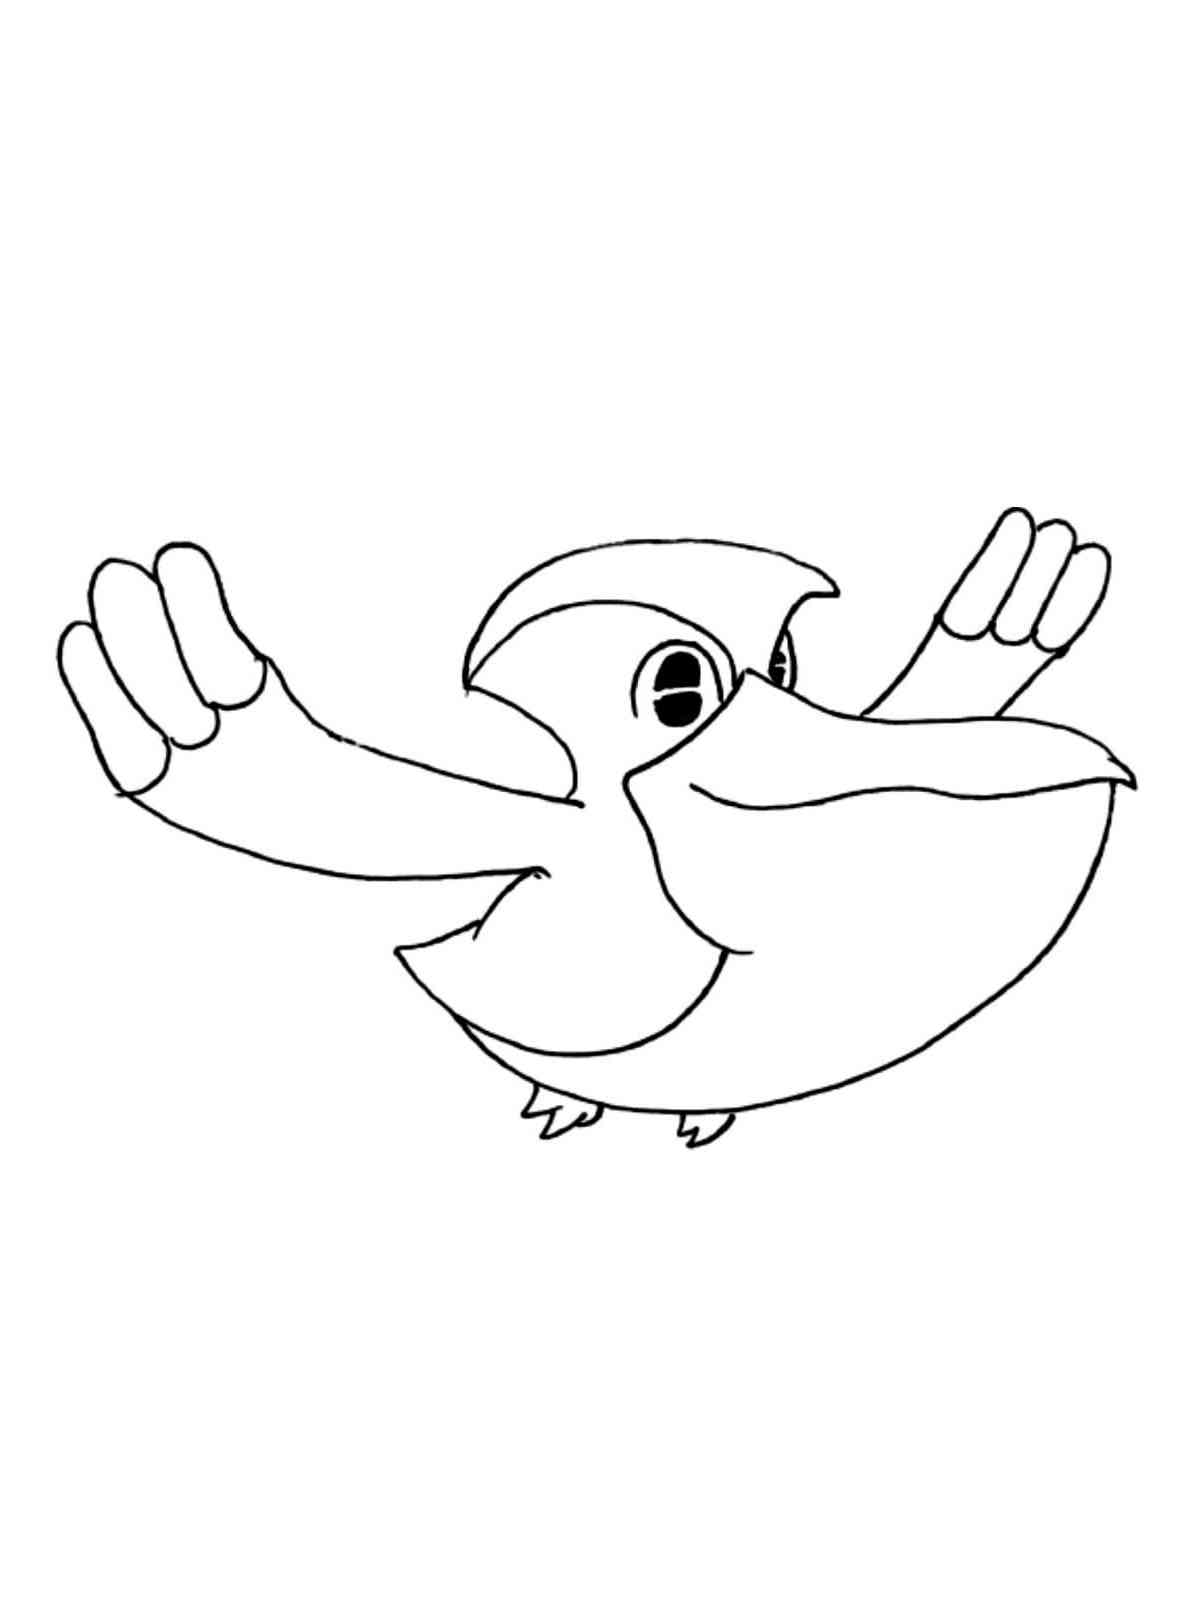 Pelipper Pokemon coloring pages